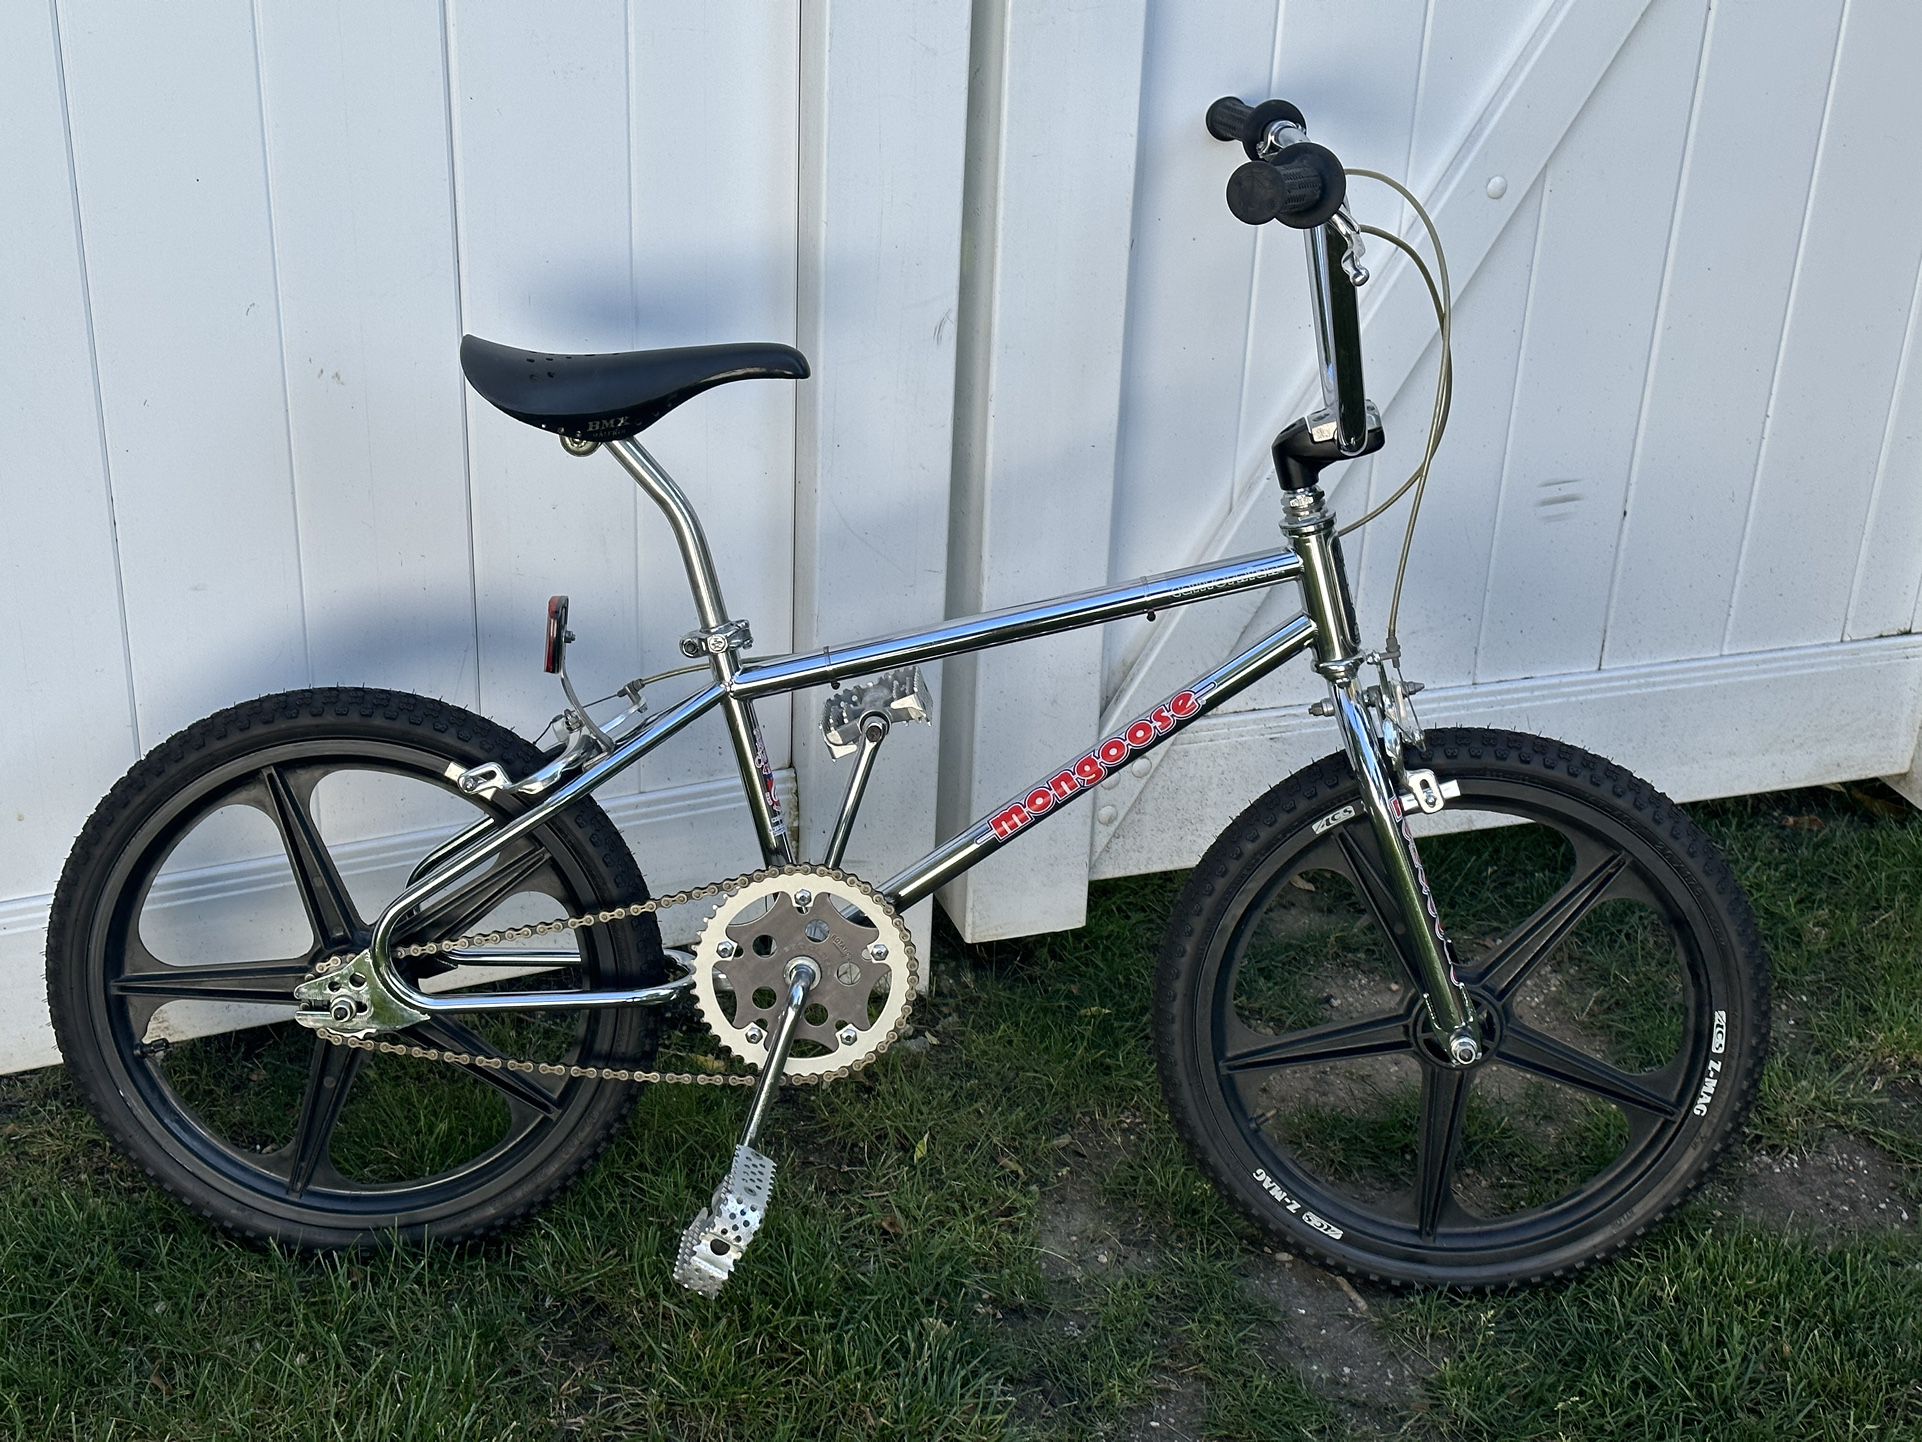 1986 Mongoose Californian Old School BMX for Sale in Bellmore